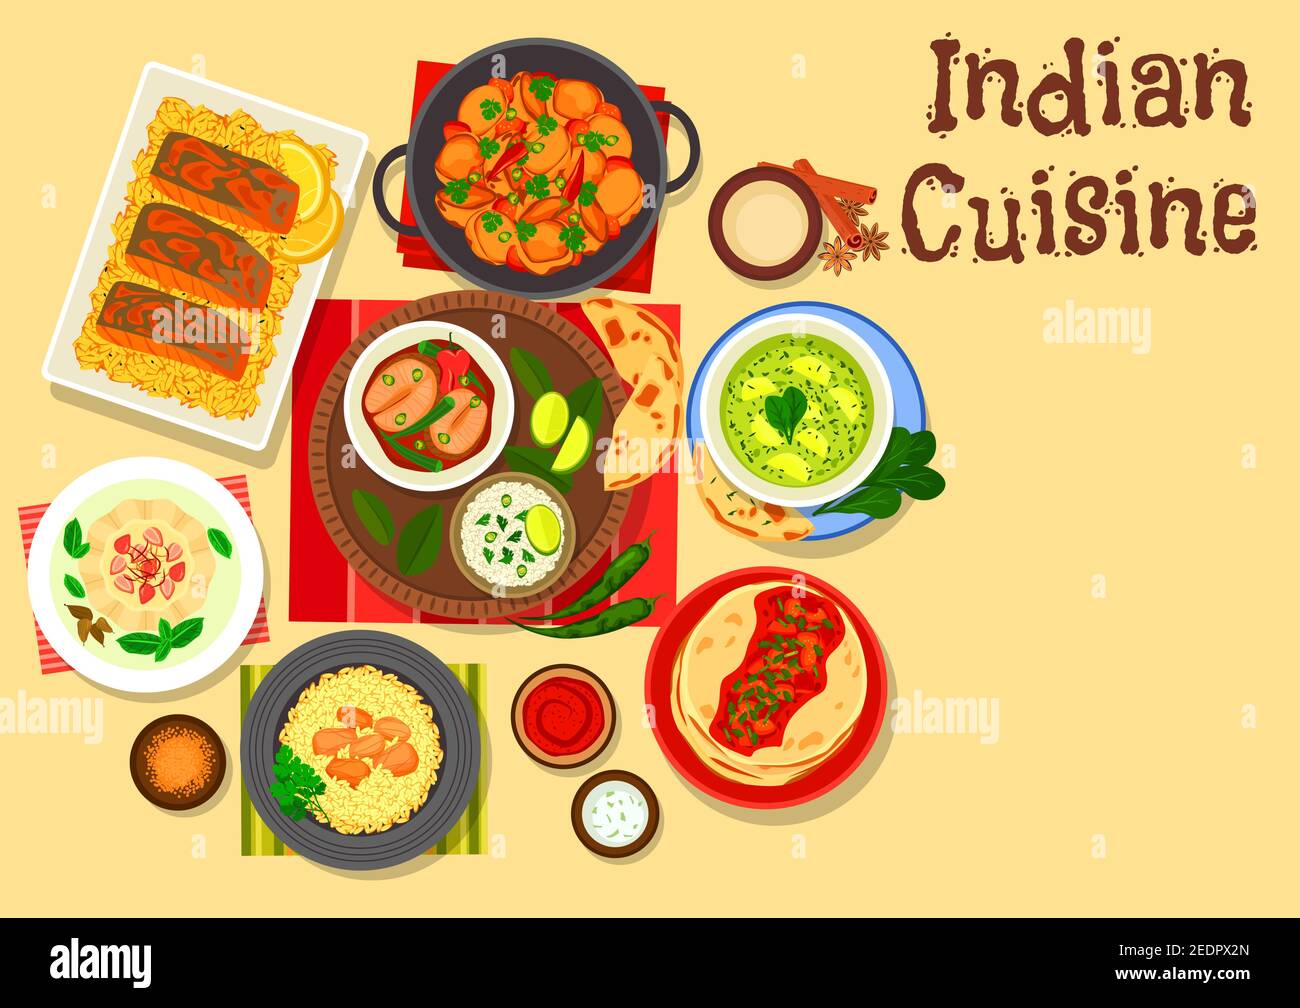 Indian cuisine chicken and fish curry icon served with rice, tomato sauce chutney on flatbread, spinach cheese soup, baked fish, cream dessert with fr Stock Vector